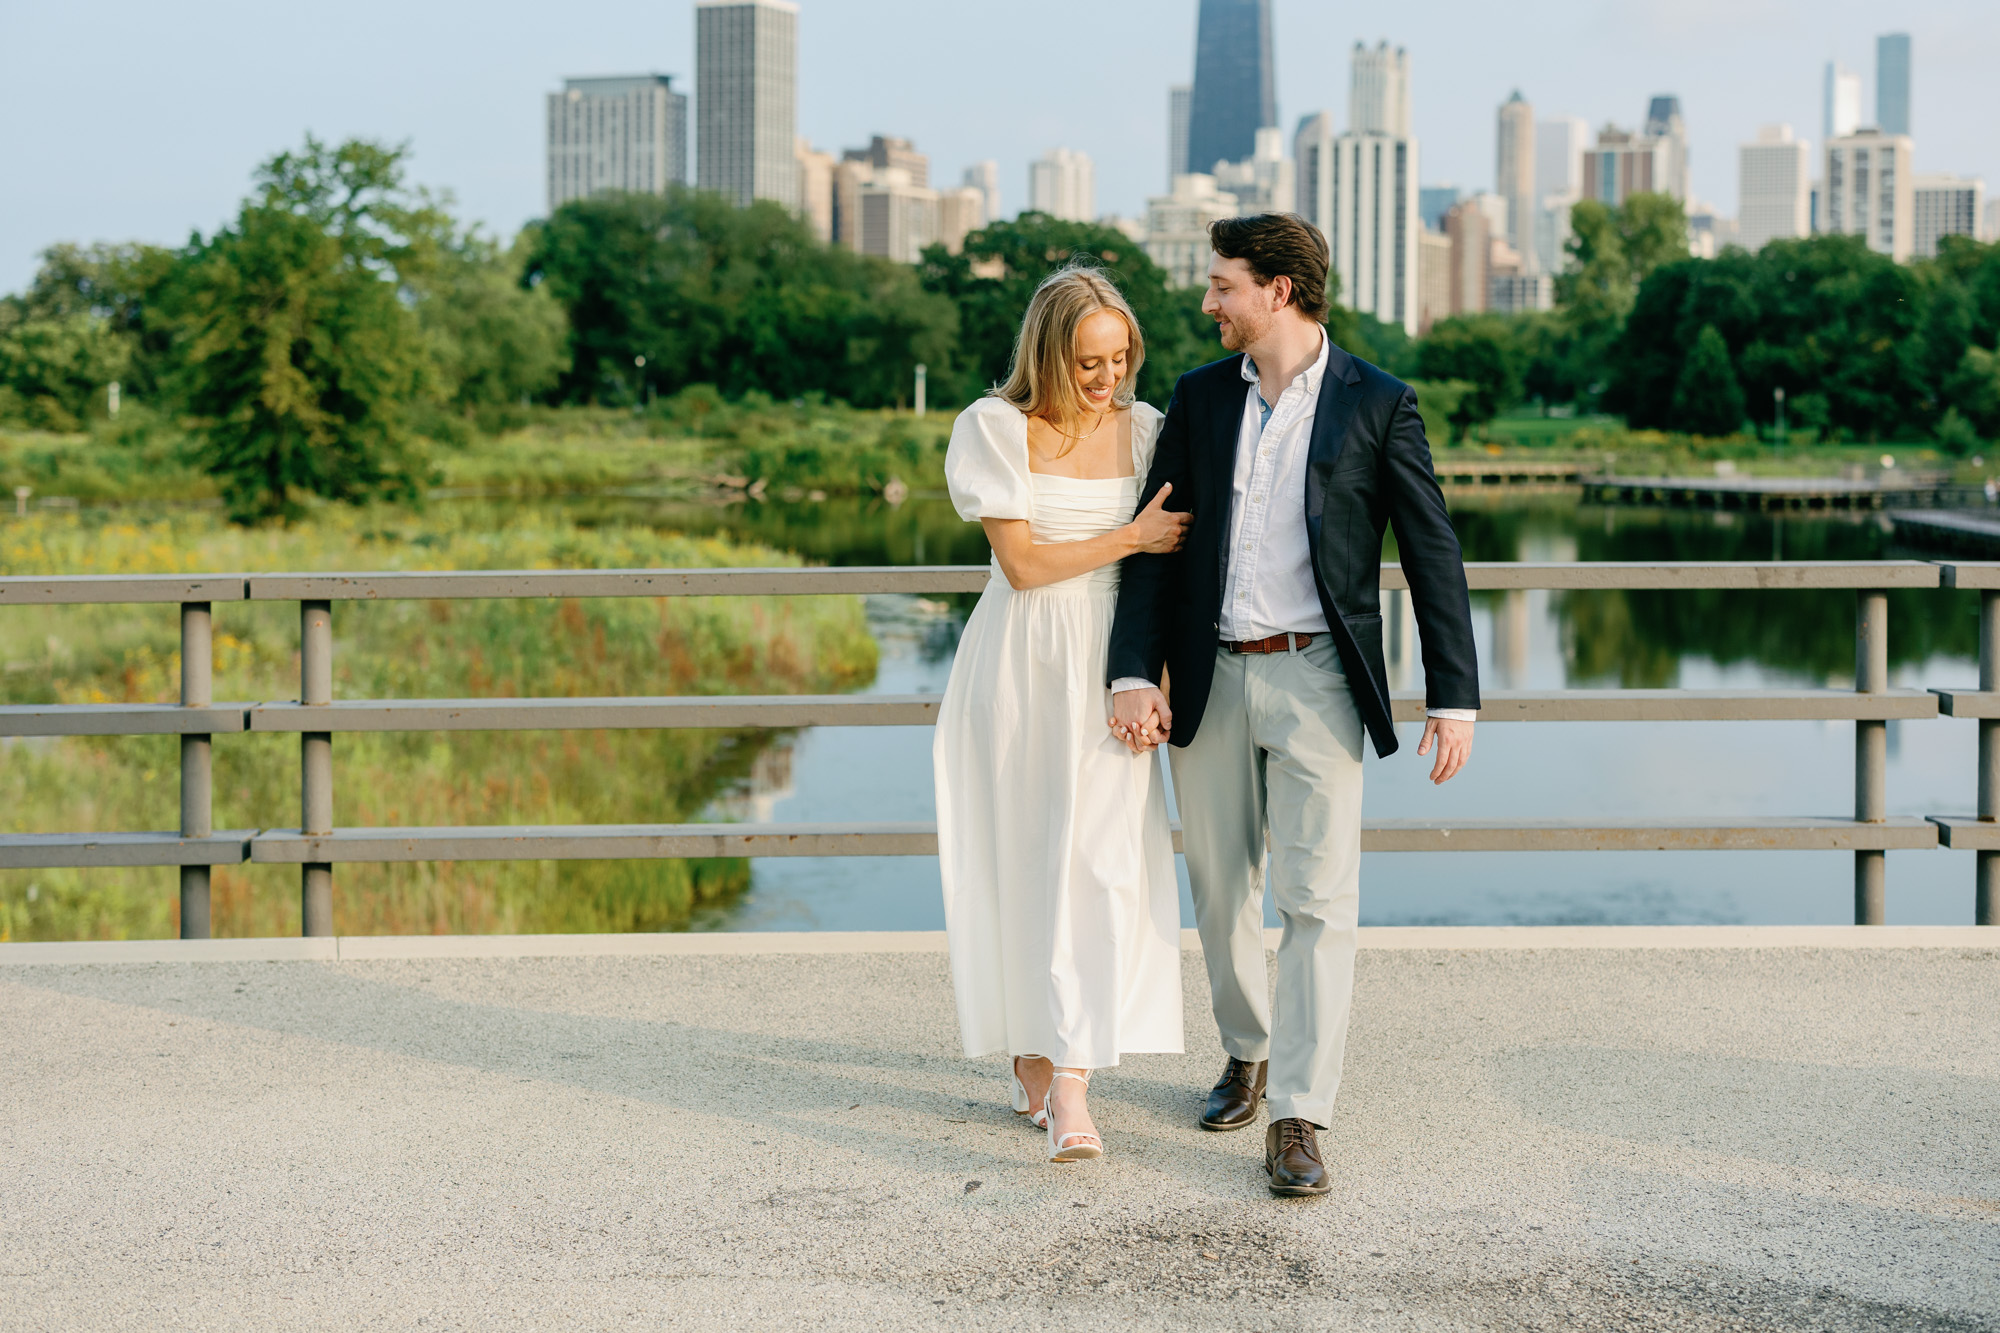 A couple walk together along Lincoln Park's Nature Boardwalk for an engagement photo.